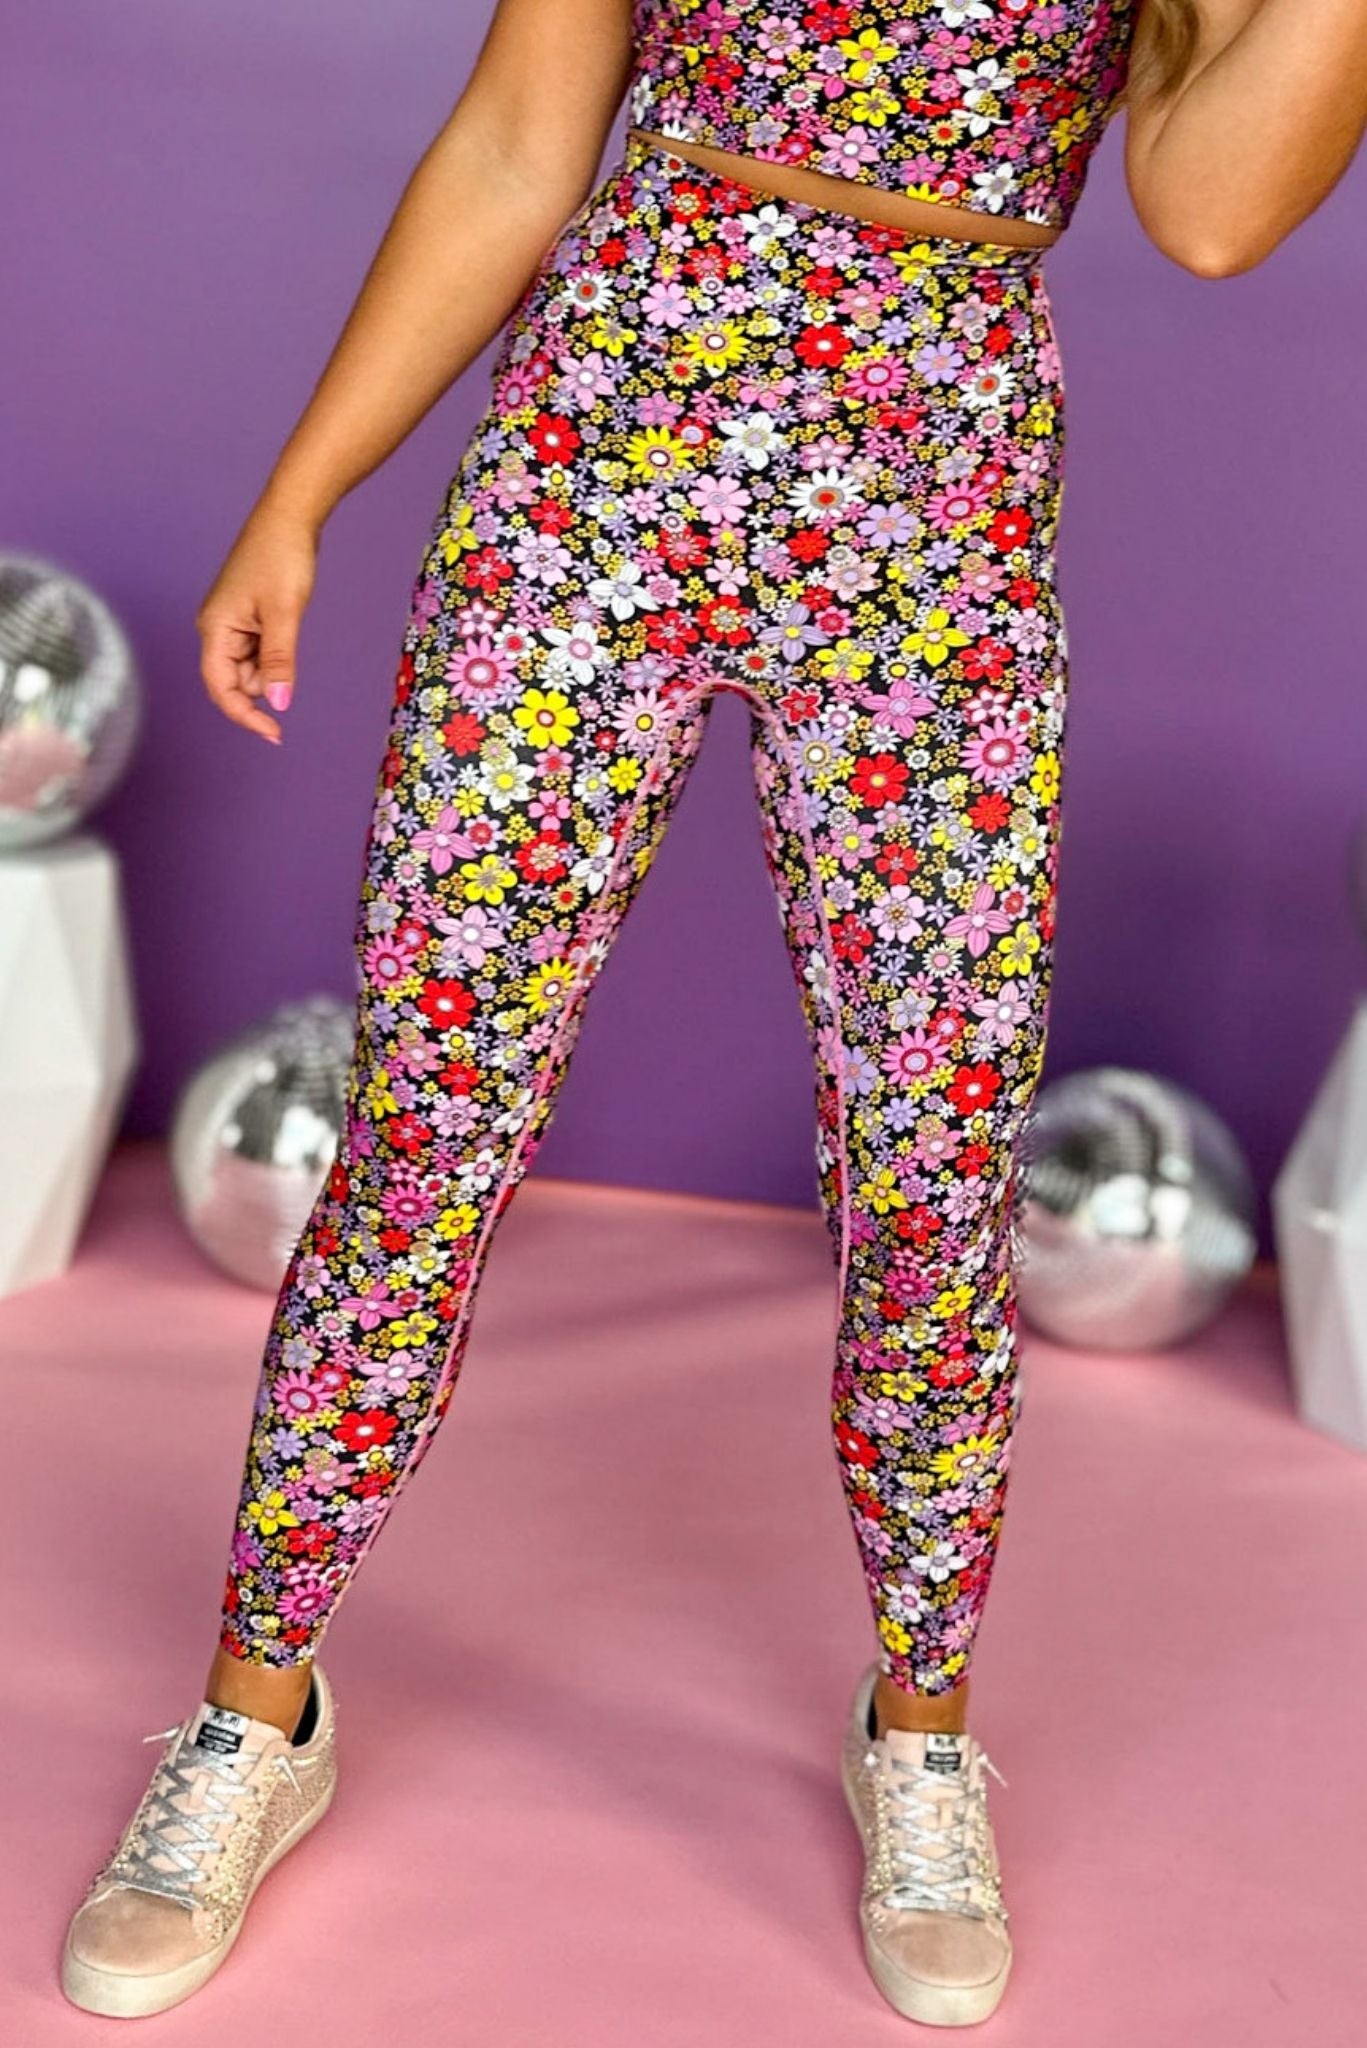 SSYS Colorful Floral High Waist Seamless Butter Leggings *FINAL SALE*